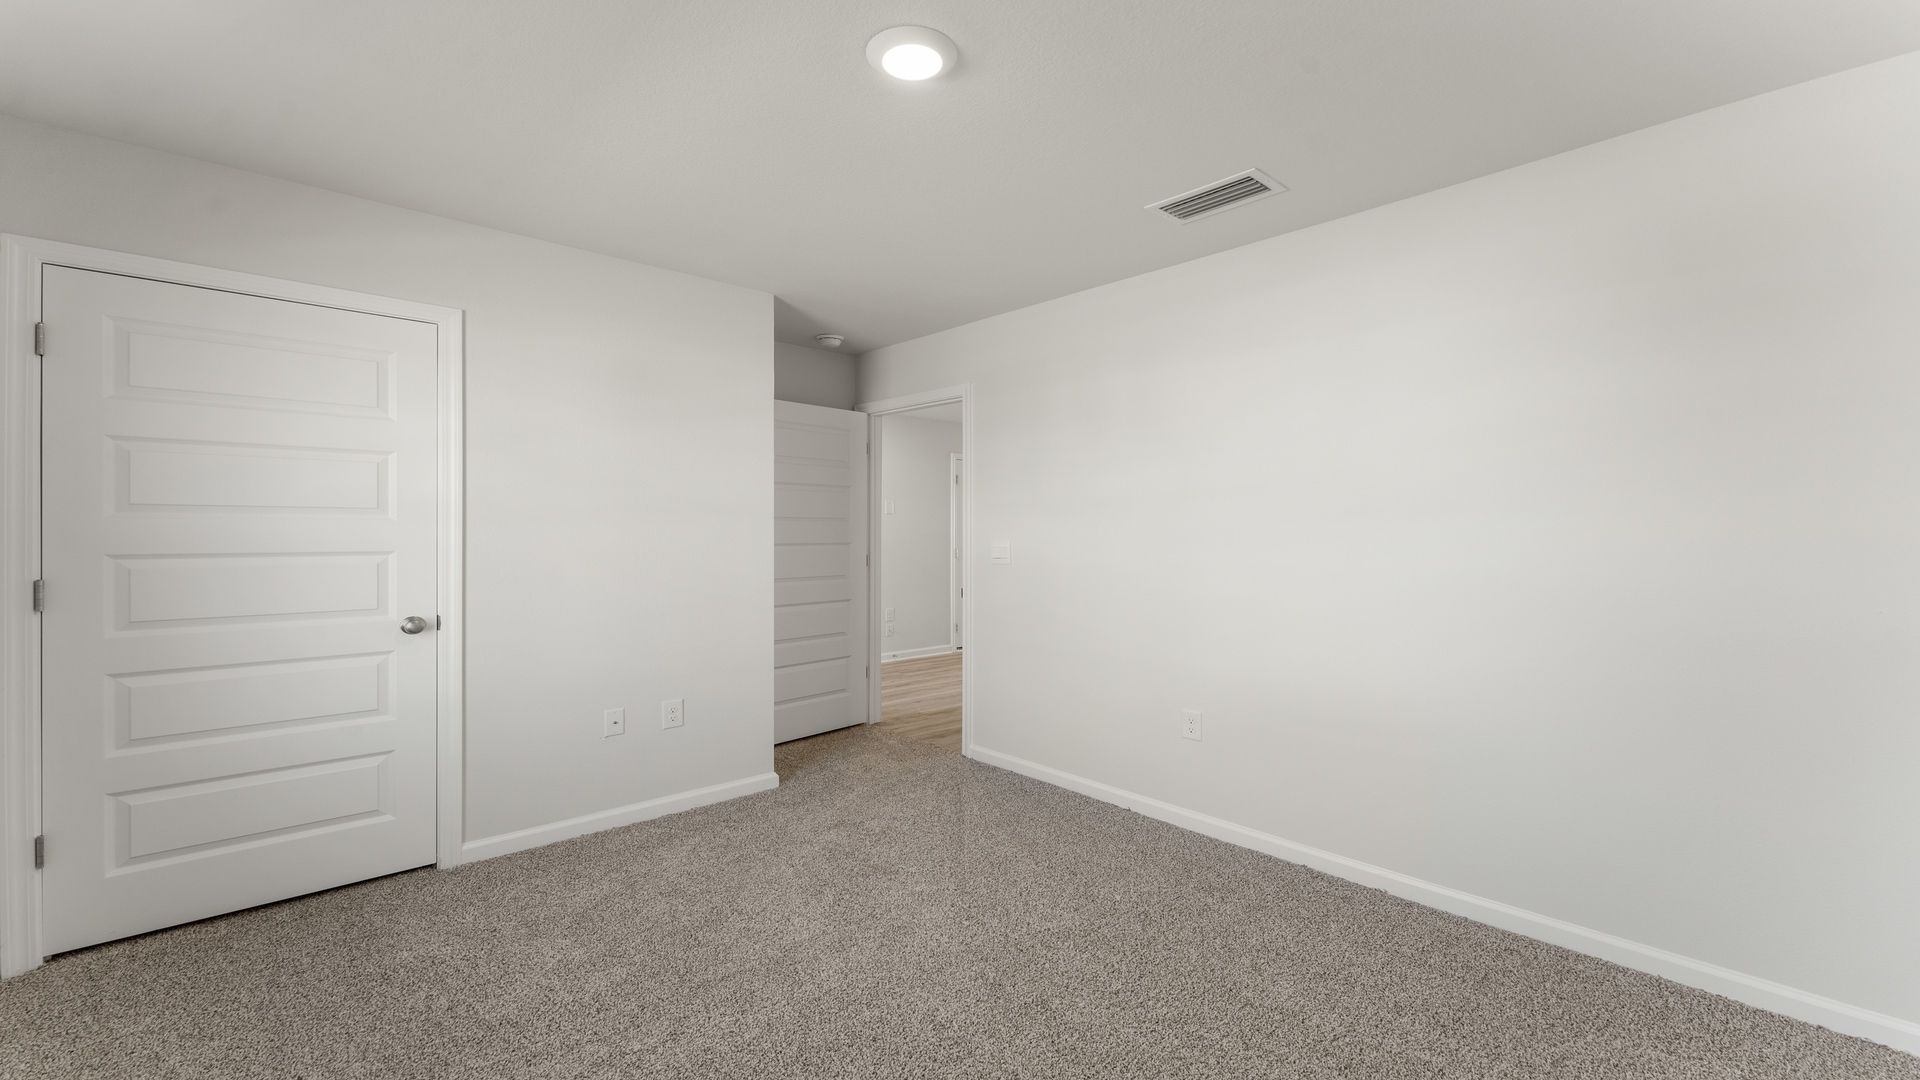 Bedroom with carpet floor and closet.